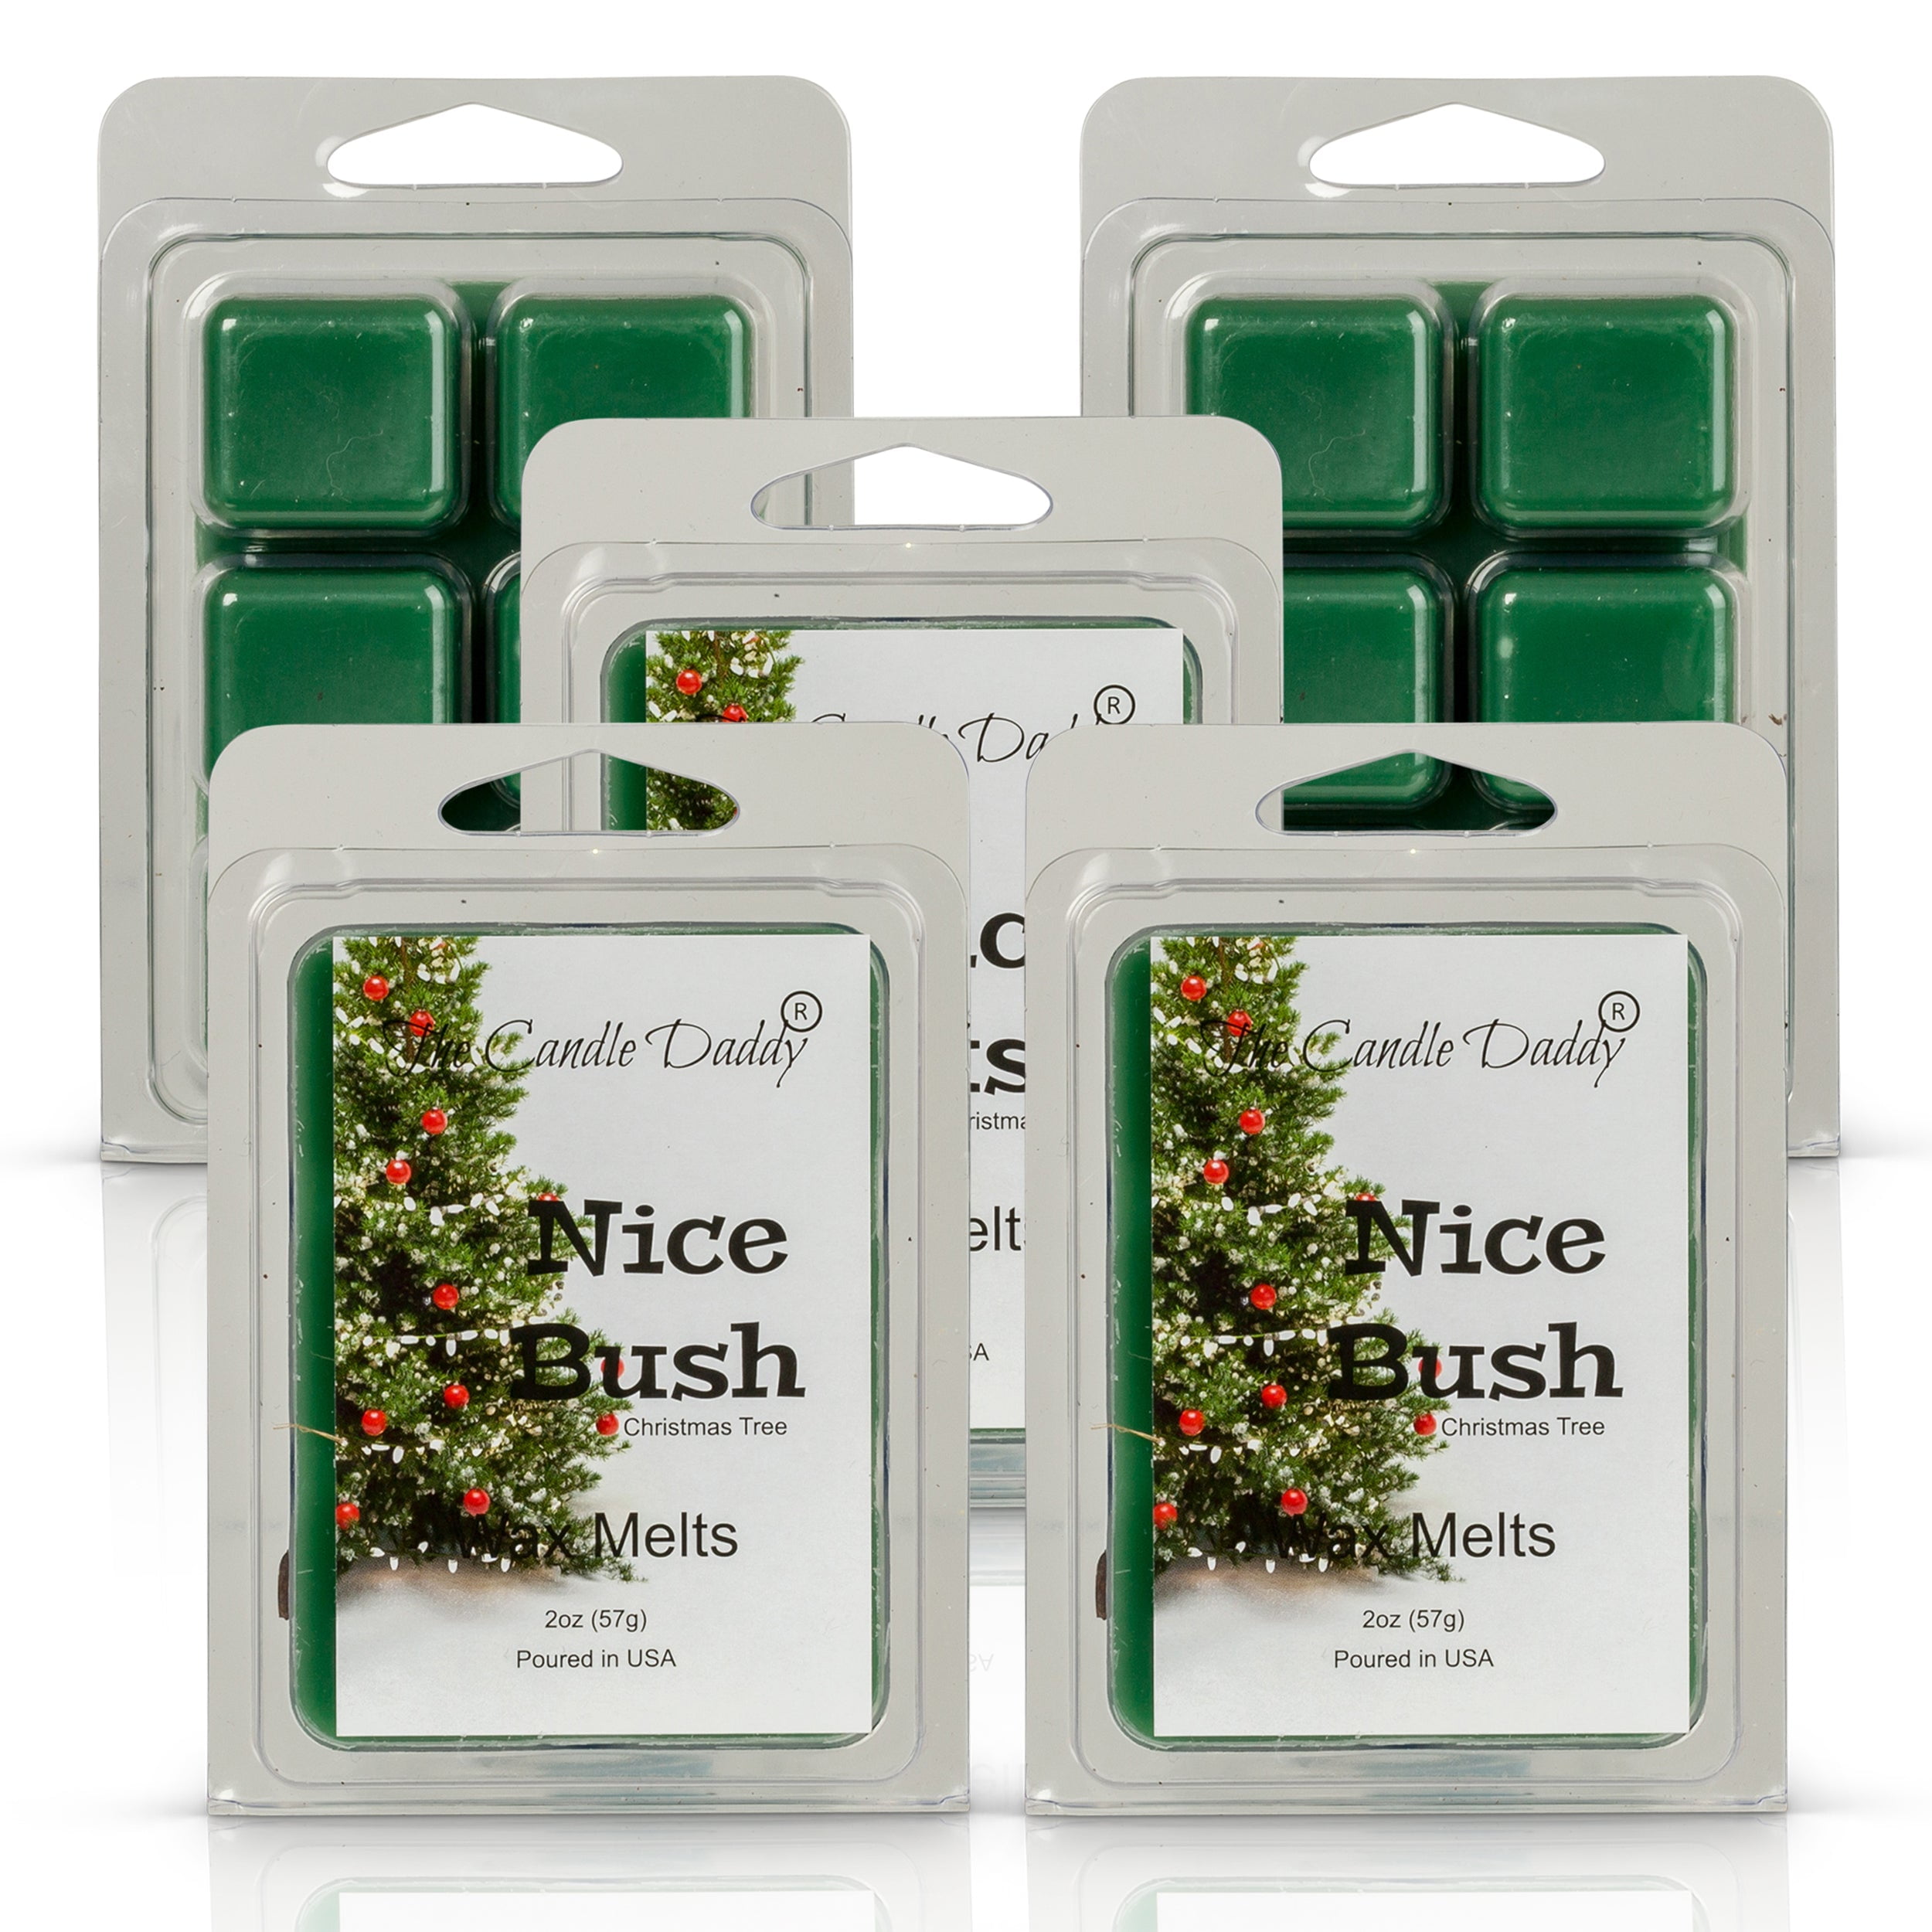 Pine Wax Melts Variety Pack - Bayberry Fir, Christmas Tree, Mistletoe Moments - Highly Scented + Natural Oils - Shortie's Candle Company, Size: 9 oz.